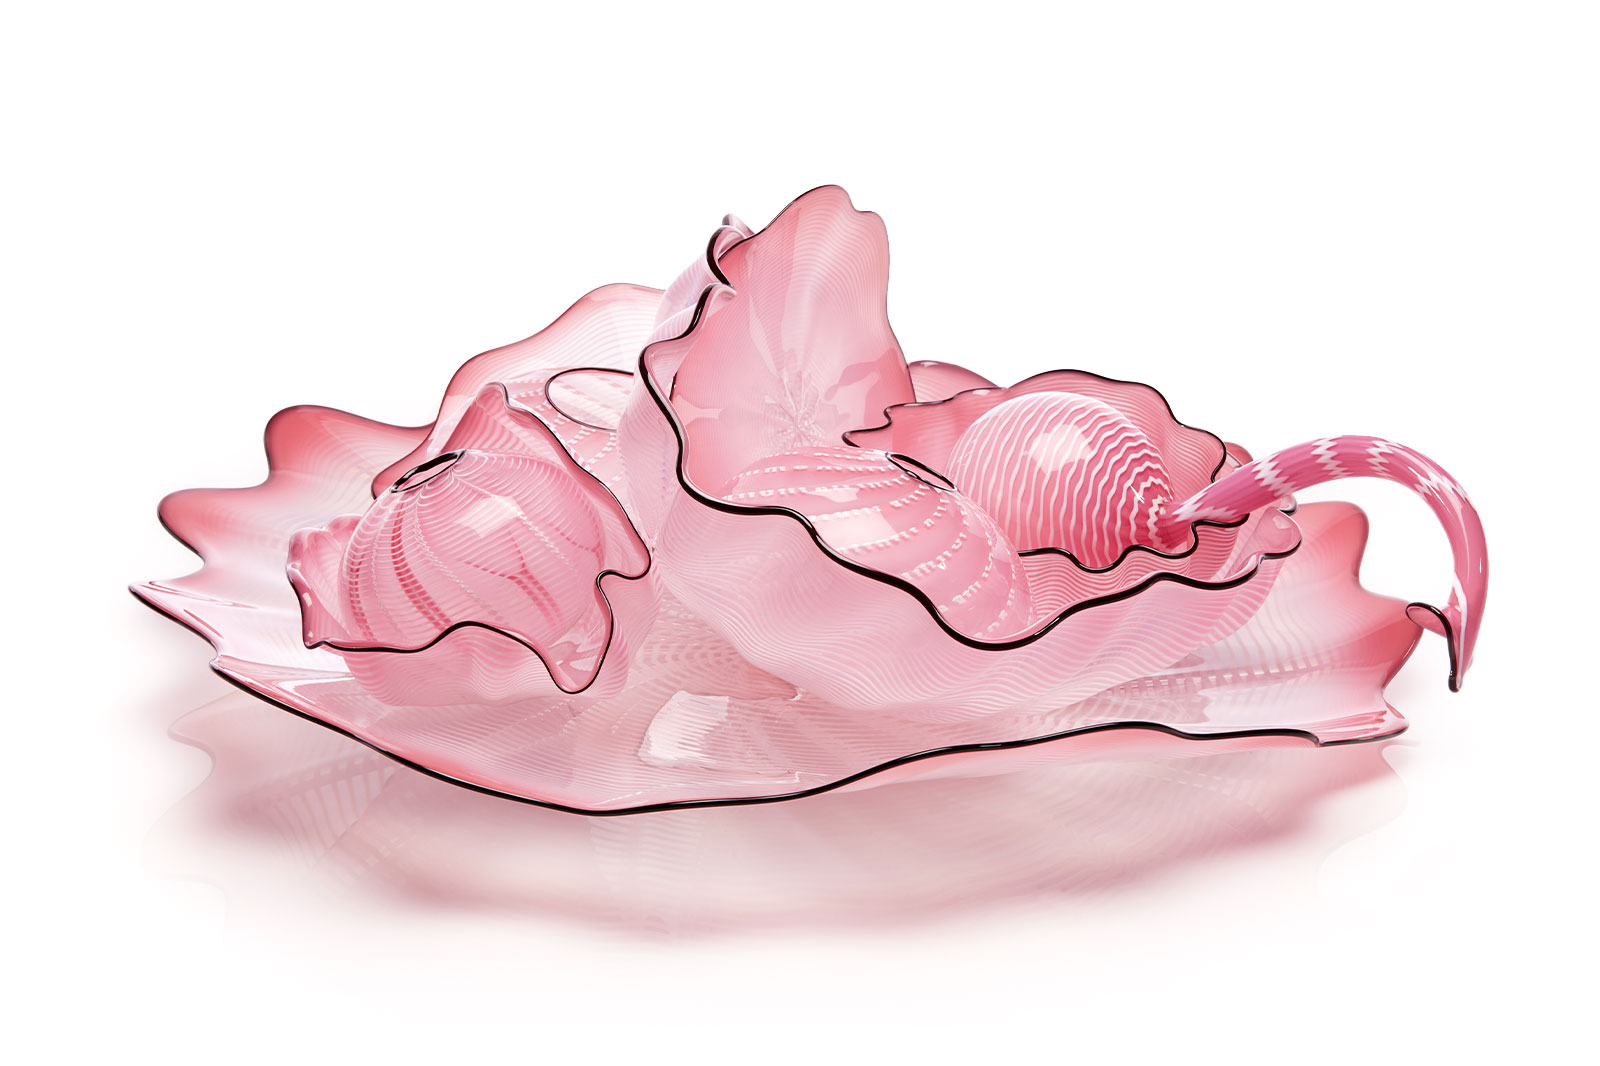 Springtime Pink Seaform Set with Kohl Lip Wraps, 2014, by Dale Chihuly